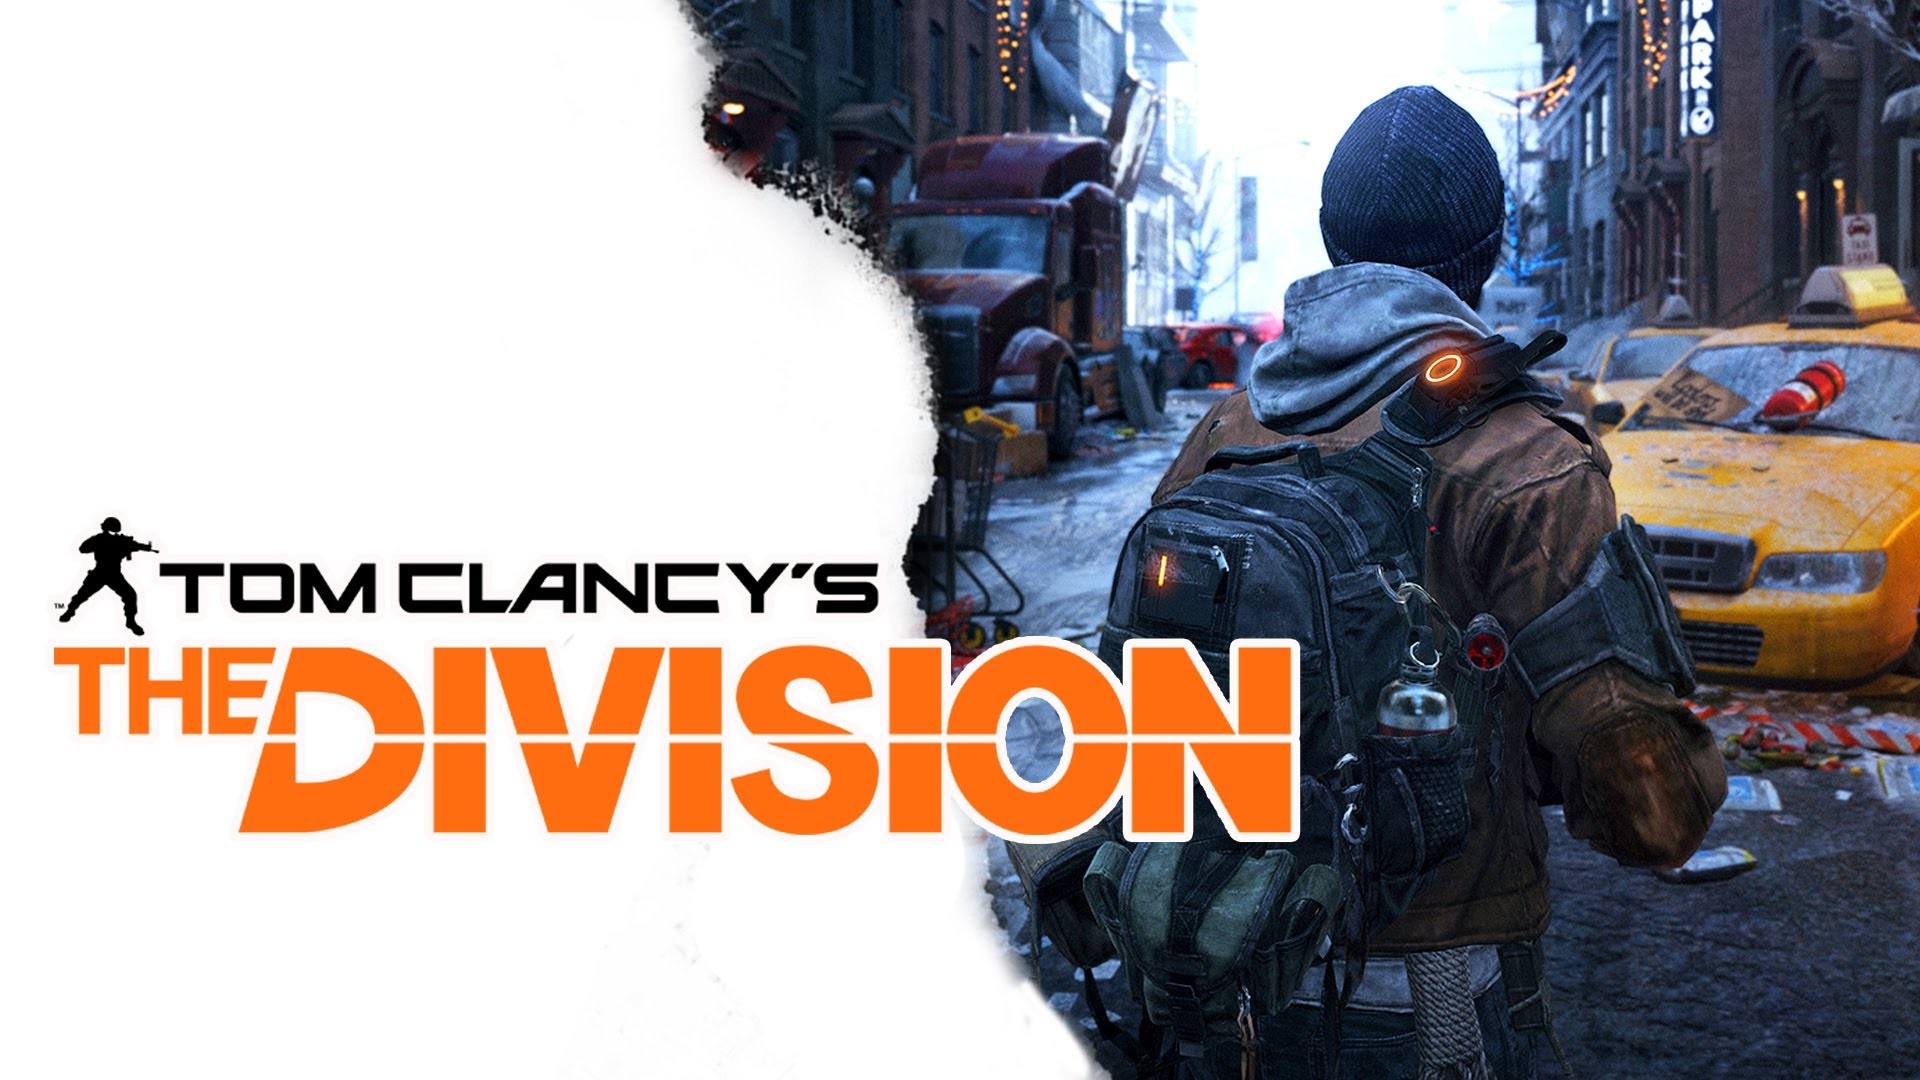 1920x1080 tom clancy's the division wallpaper hd Wallpaper